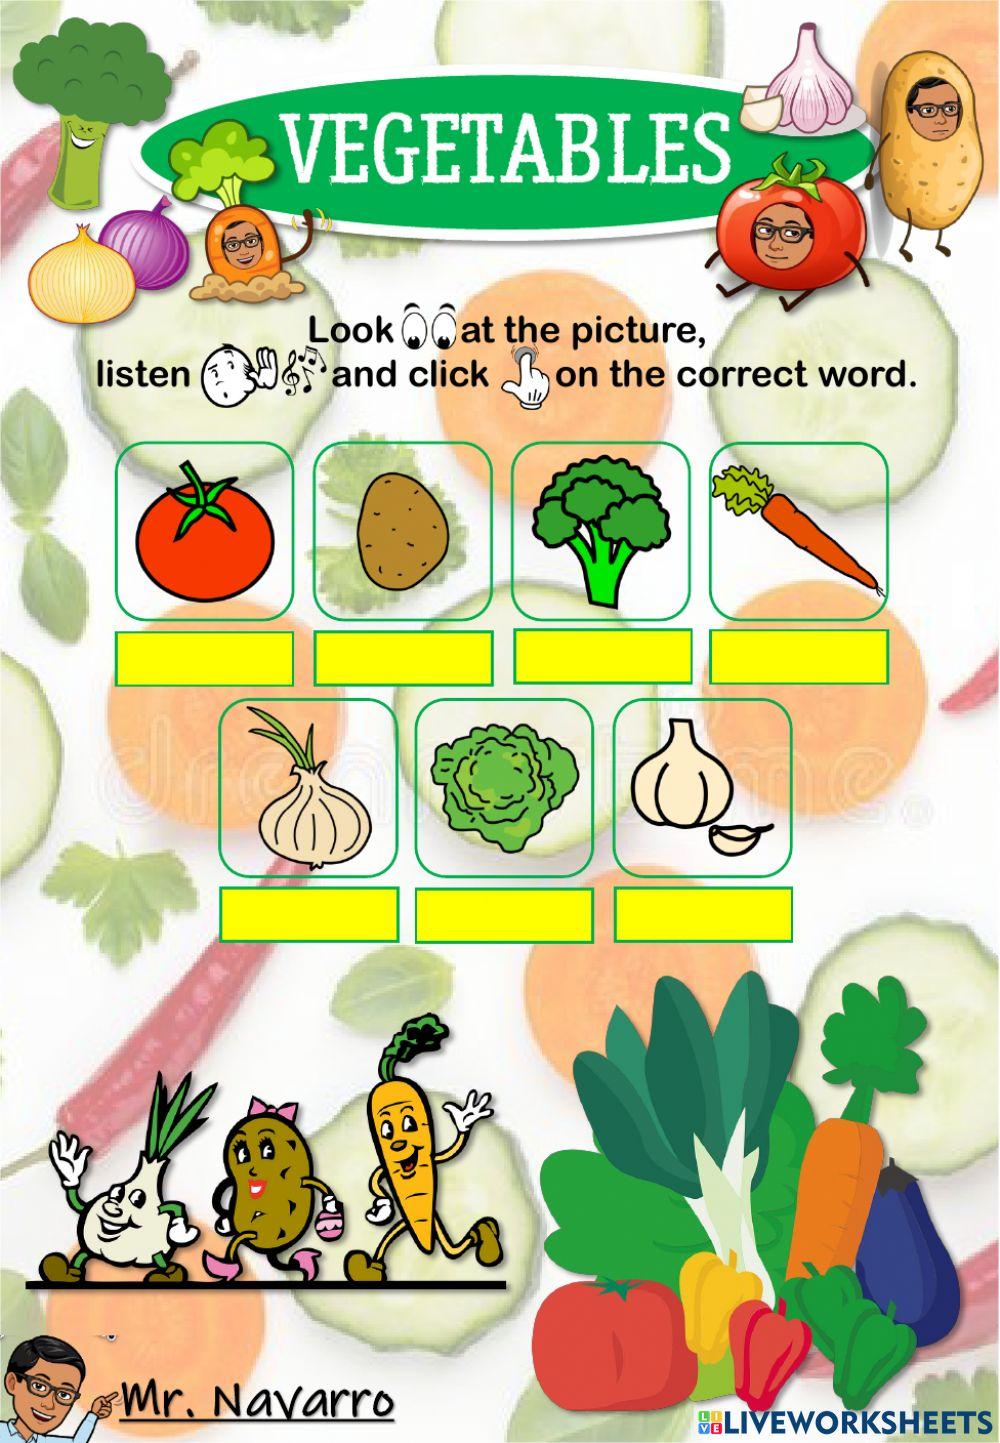 Vegetables (Look, listen and click)